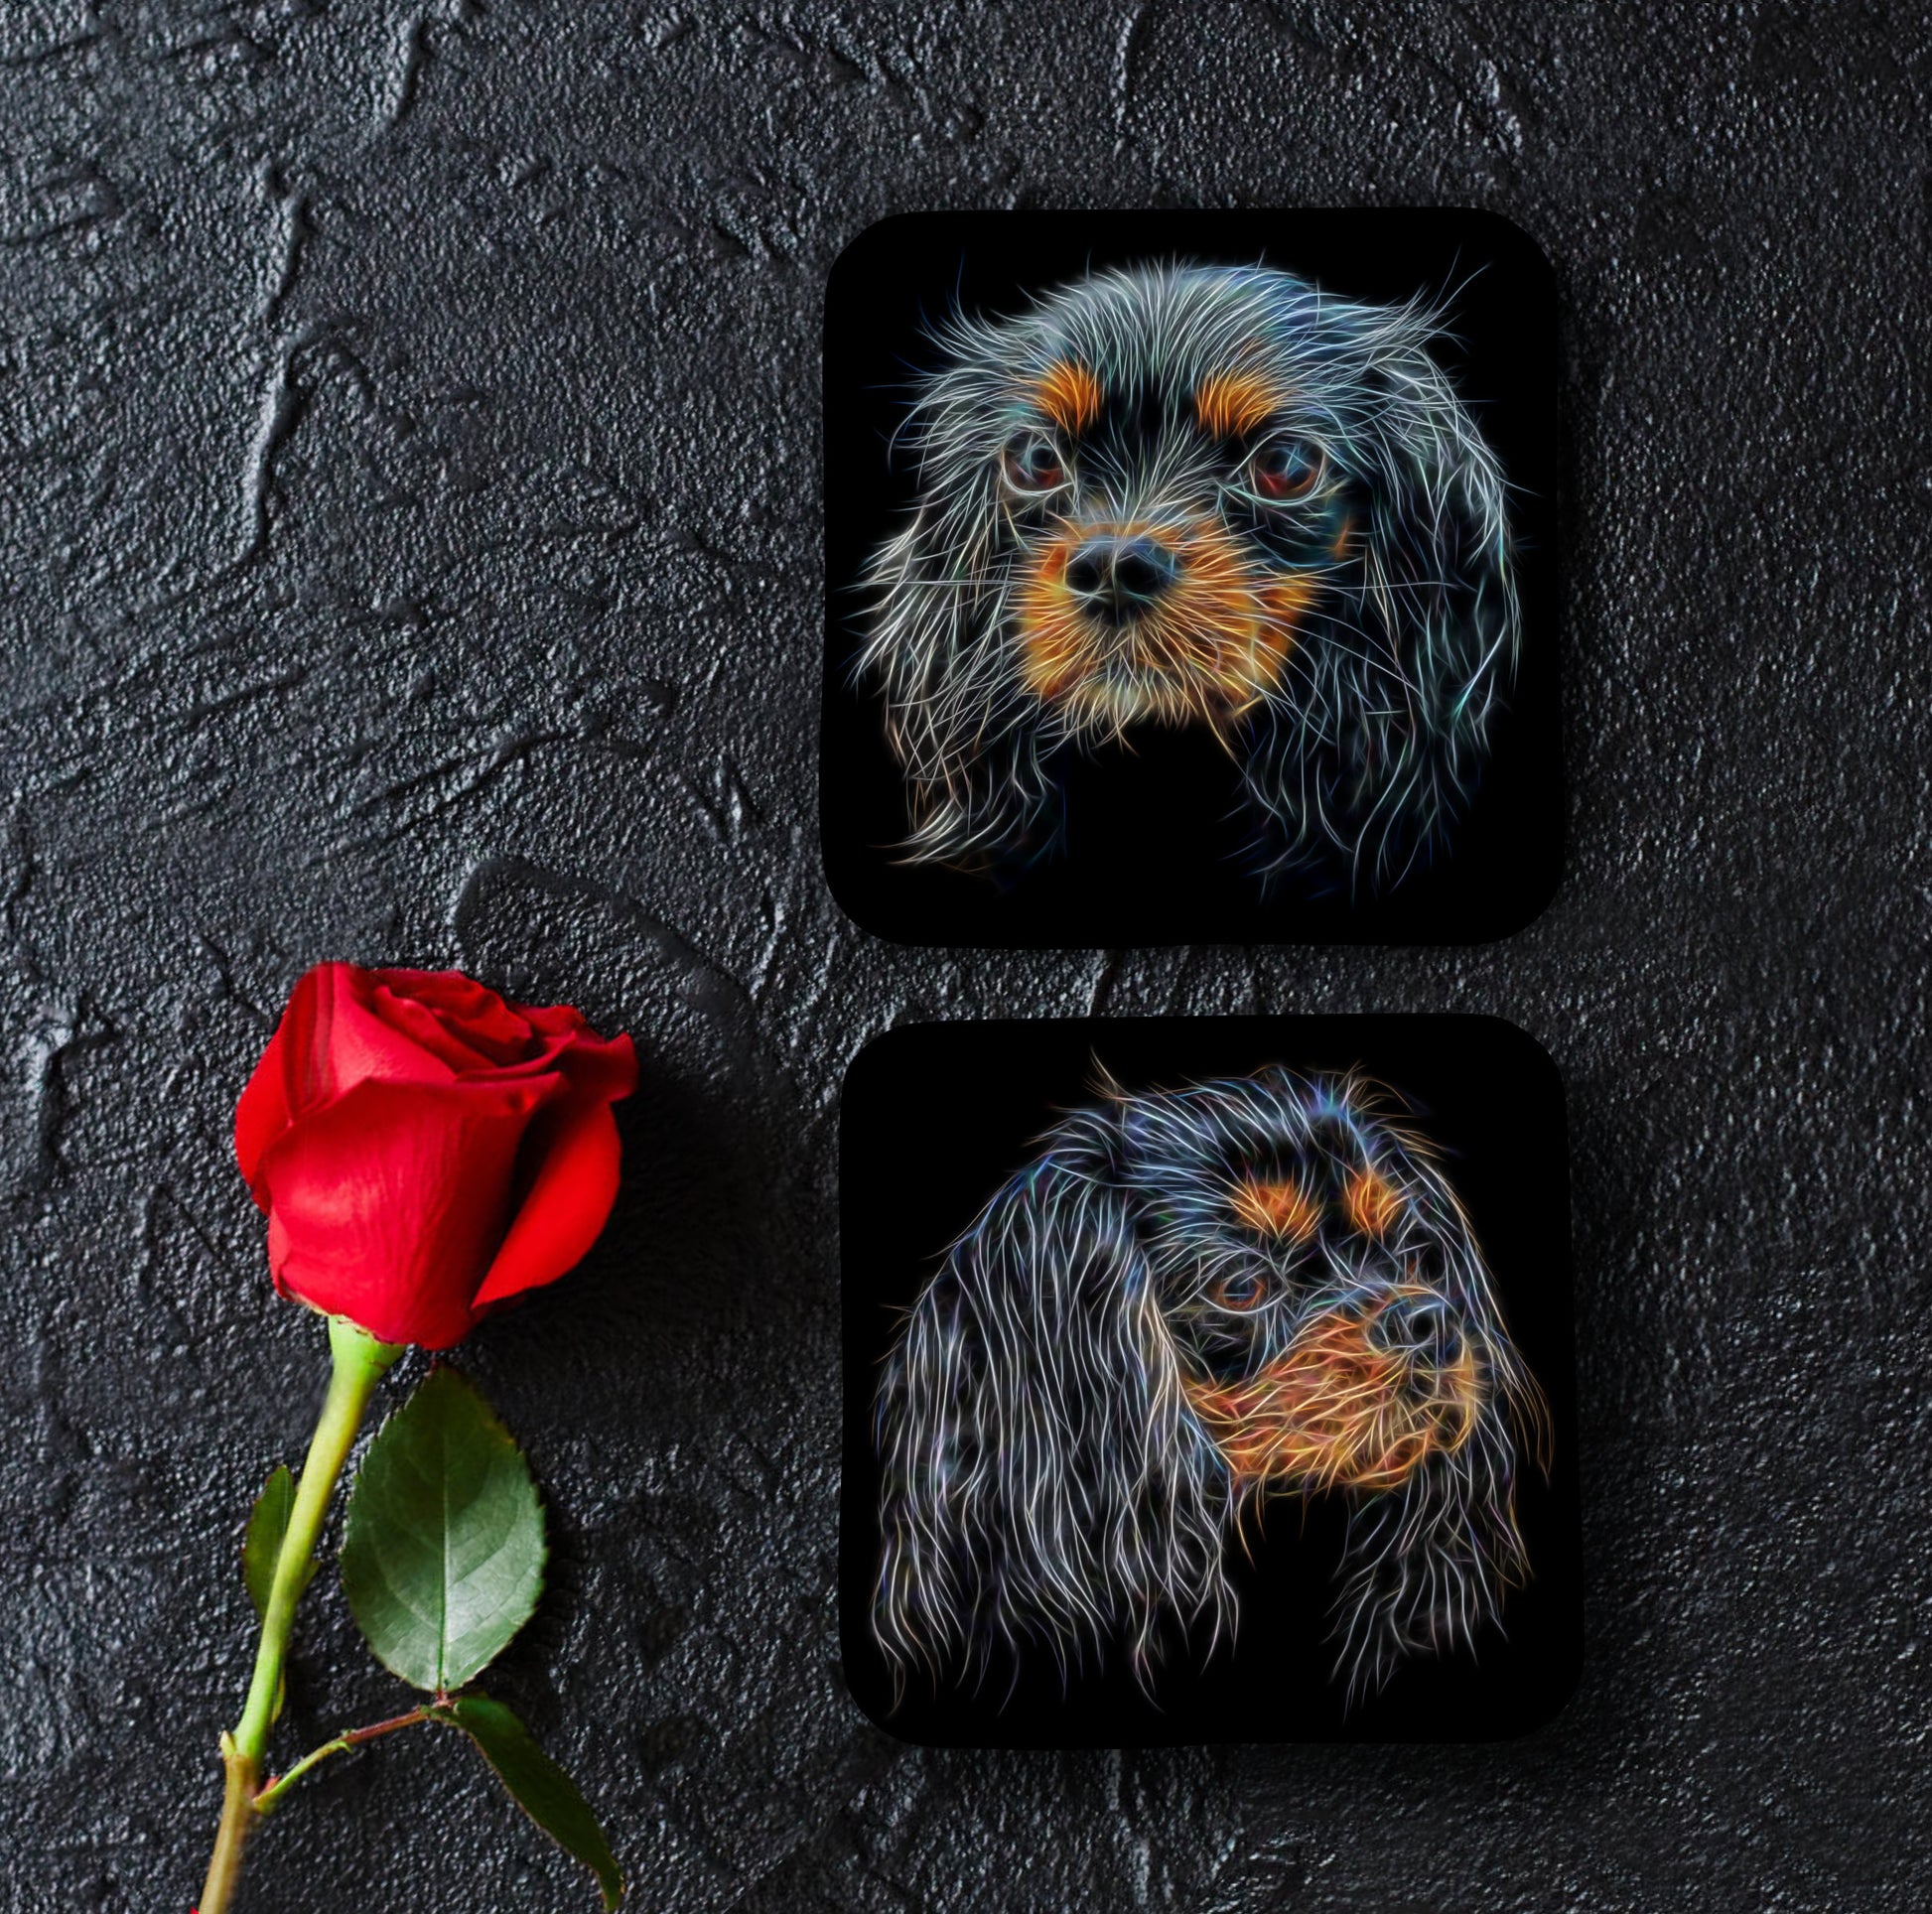 Black and Tan King Charles Spaniel Coasters, Set of 2, with Stunning Fractal Art Design.